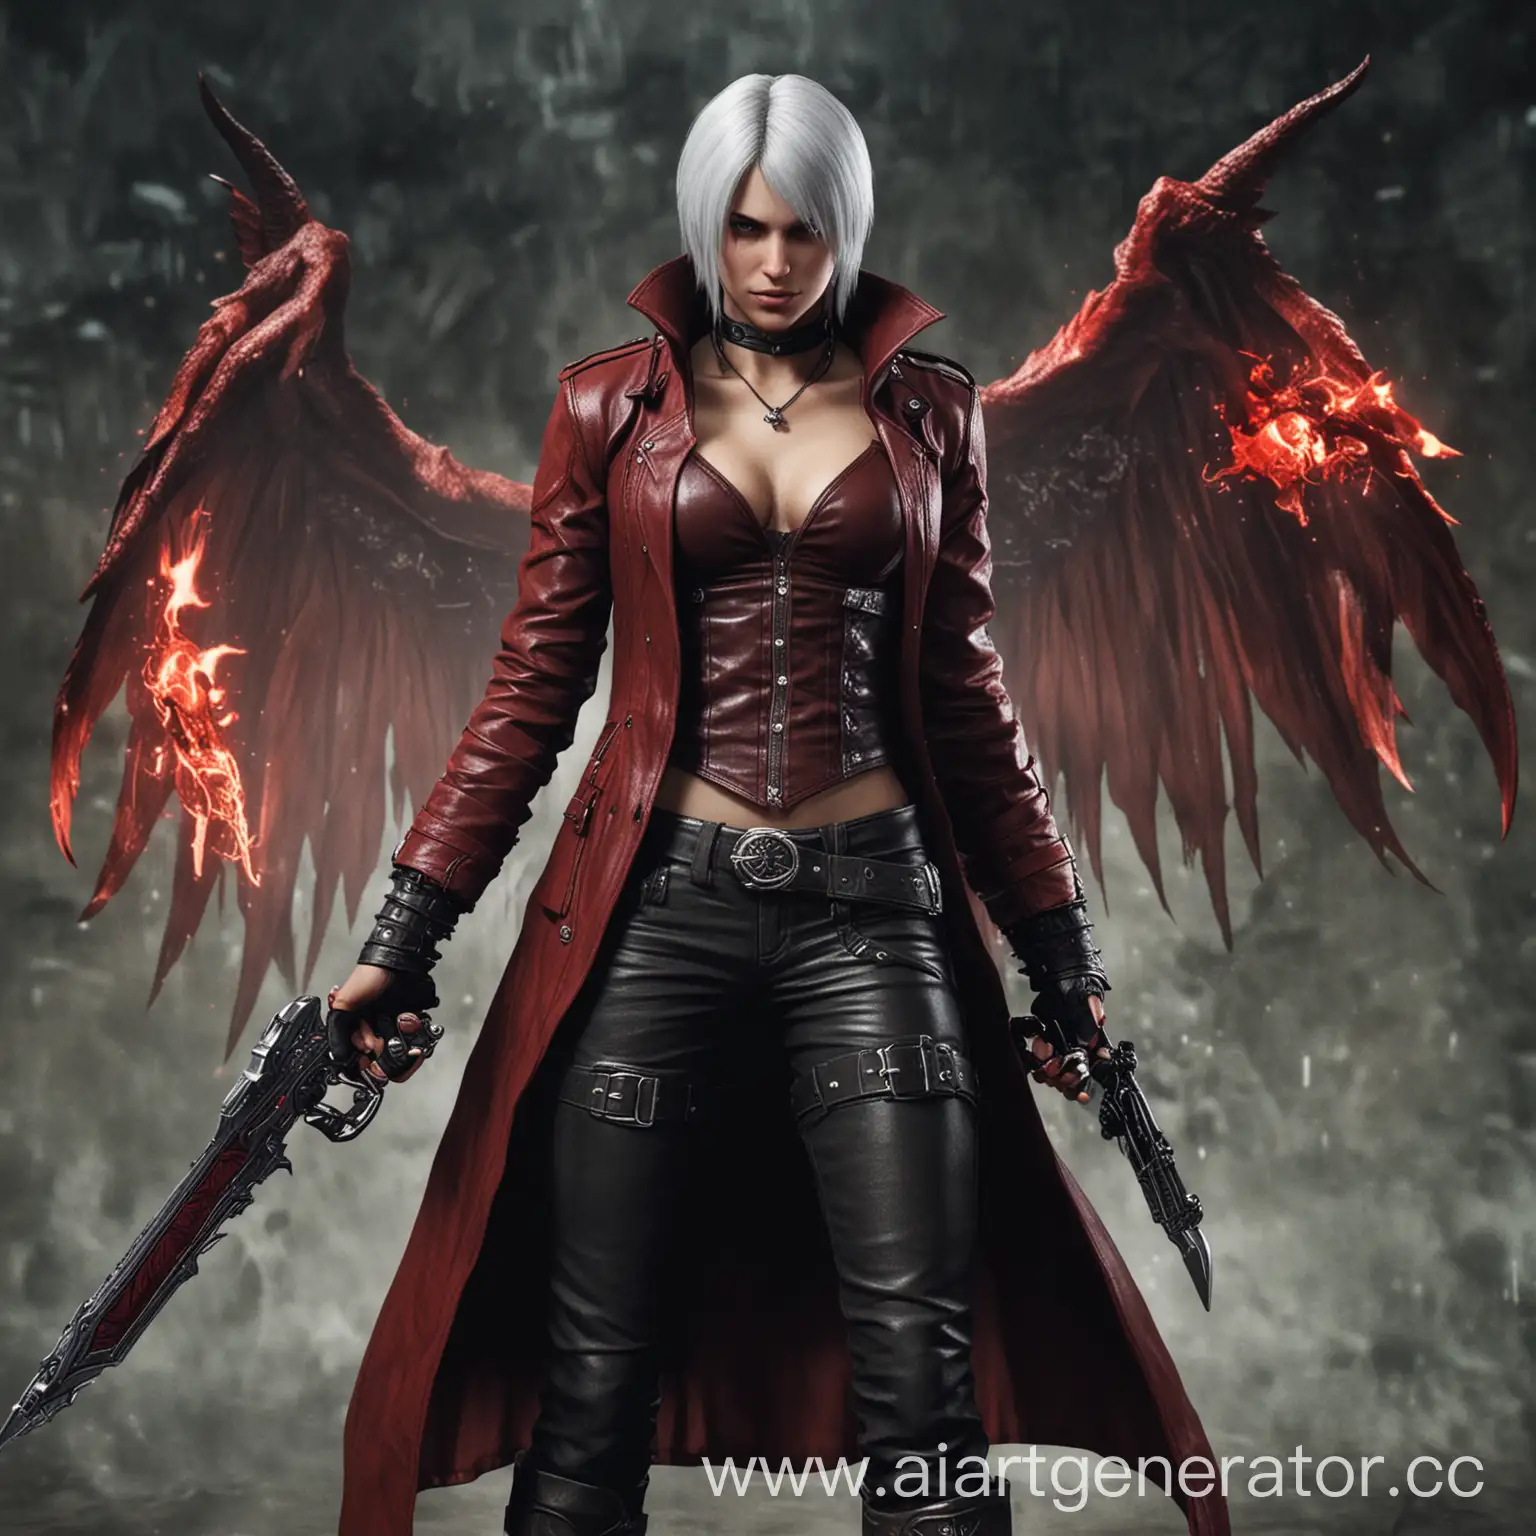 Dantes-Daughter-from-Devil-May-Cry-in-Fiery-Confrontation